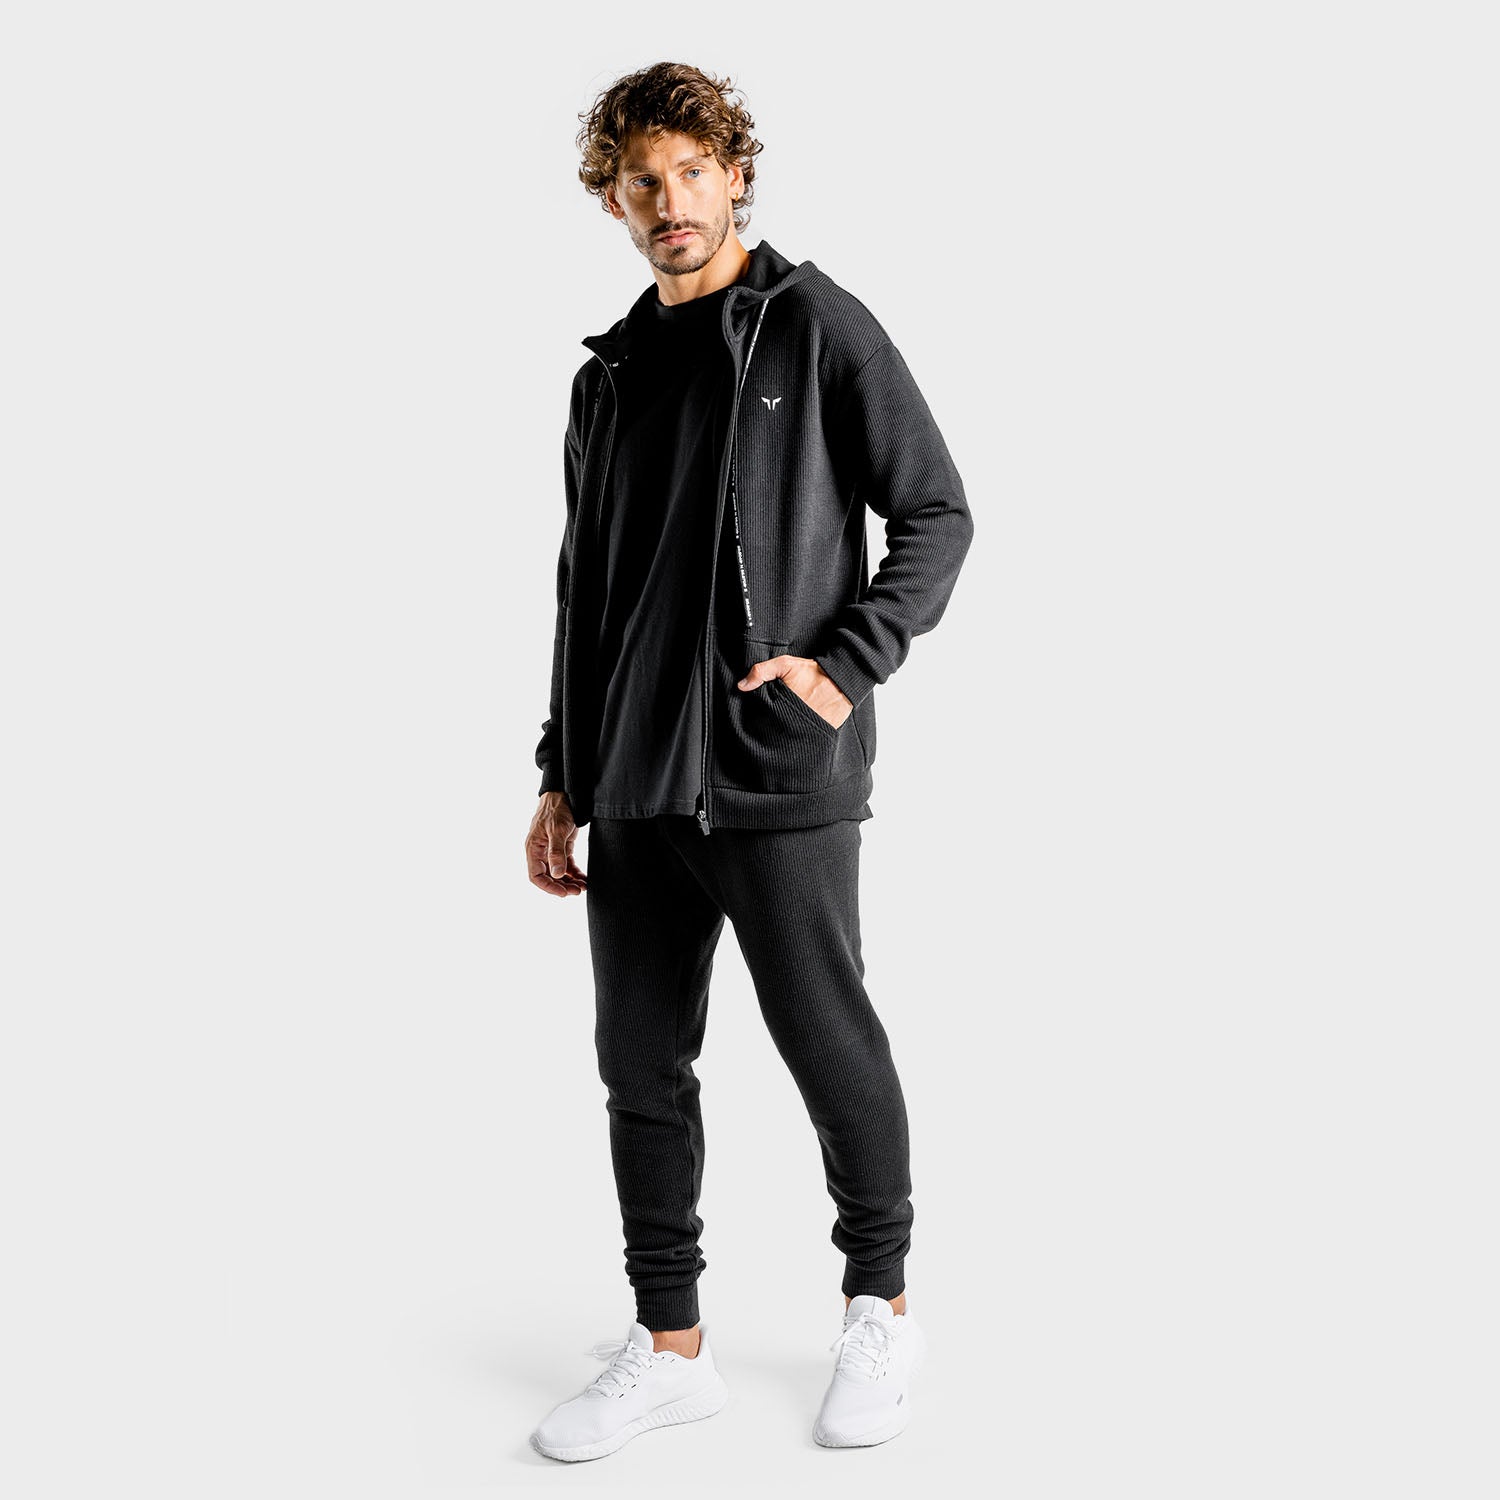 squatwolf-workout-hoodies-for-men-luxe-zip-up-black-gym-wear